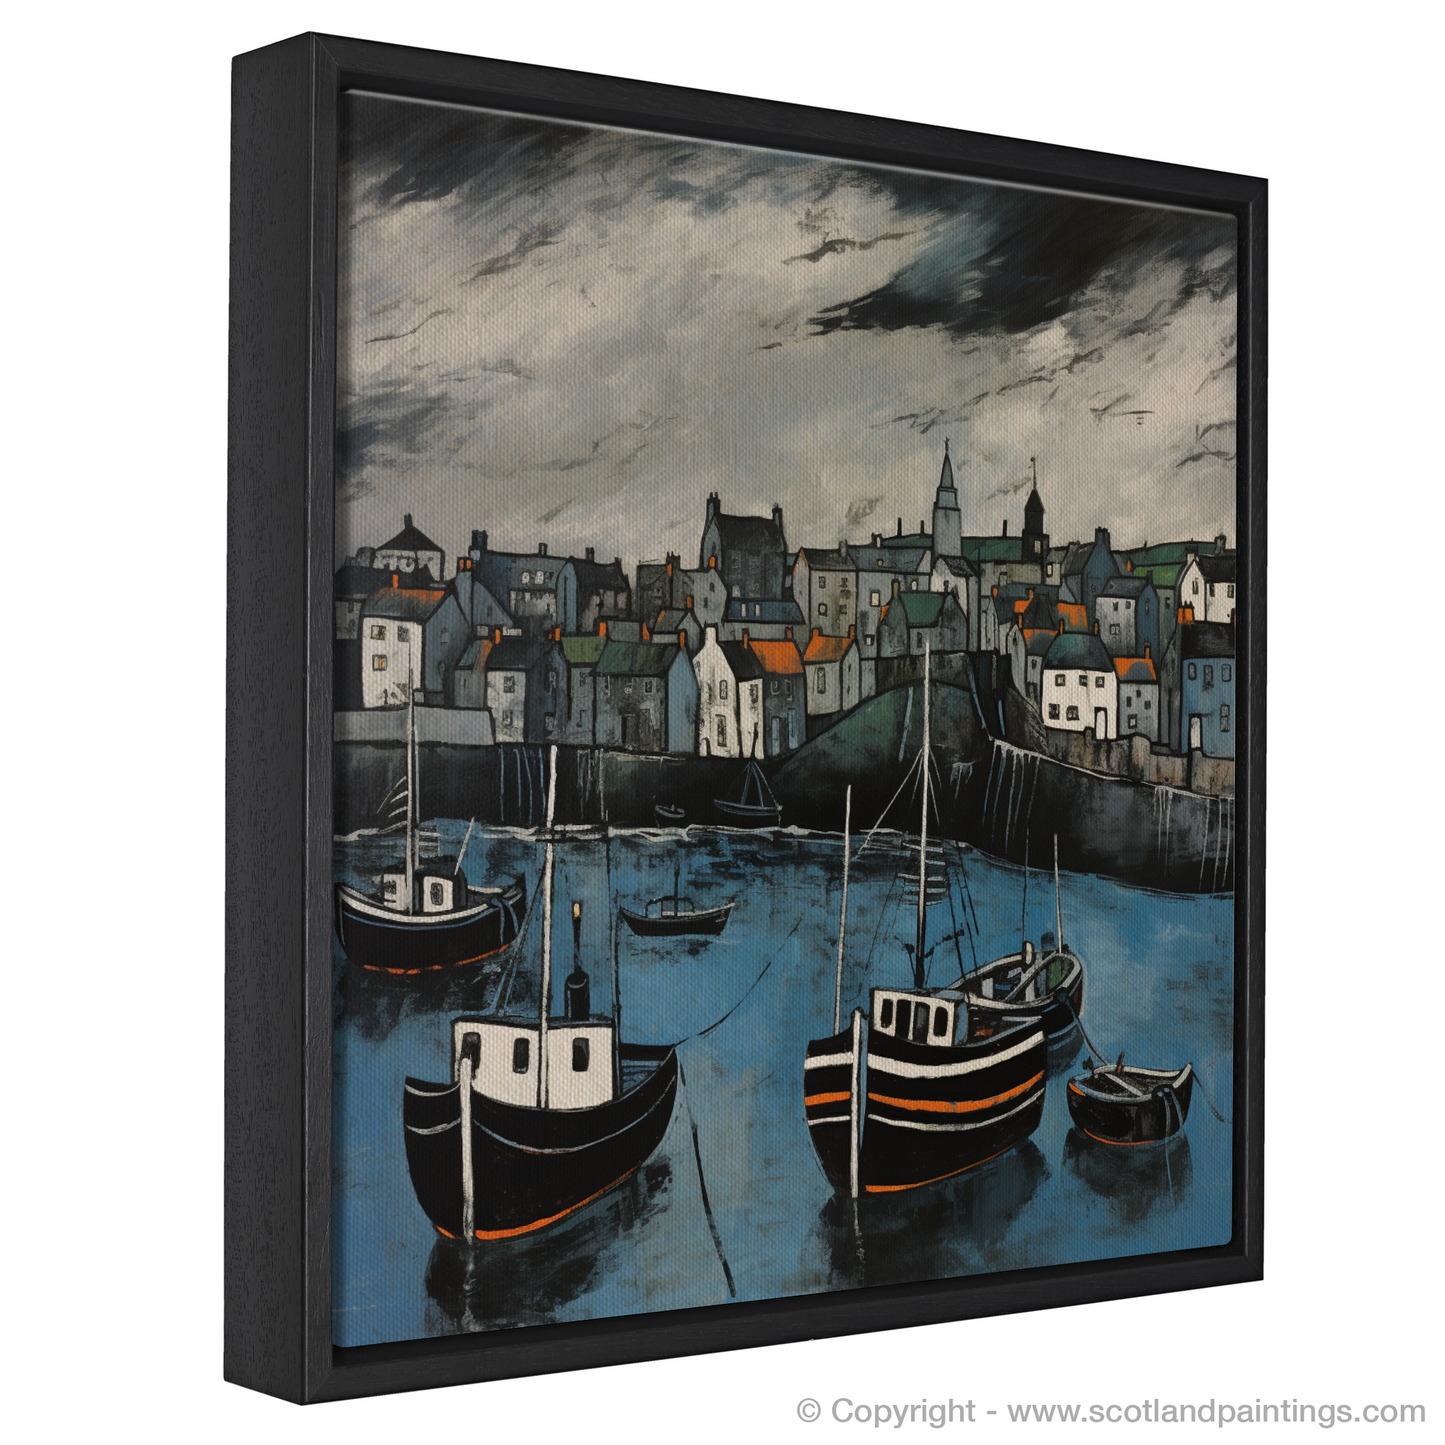 Painting and Art Print of Portsoy Harbour with a stormy sky. Stormy Skies over Portsoy Harbour: An Illustrative Expressionist Tribute.